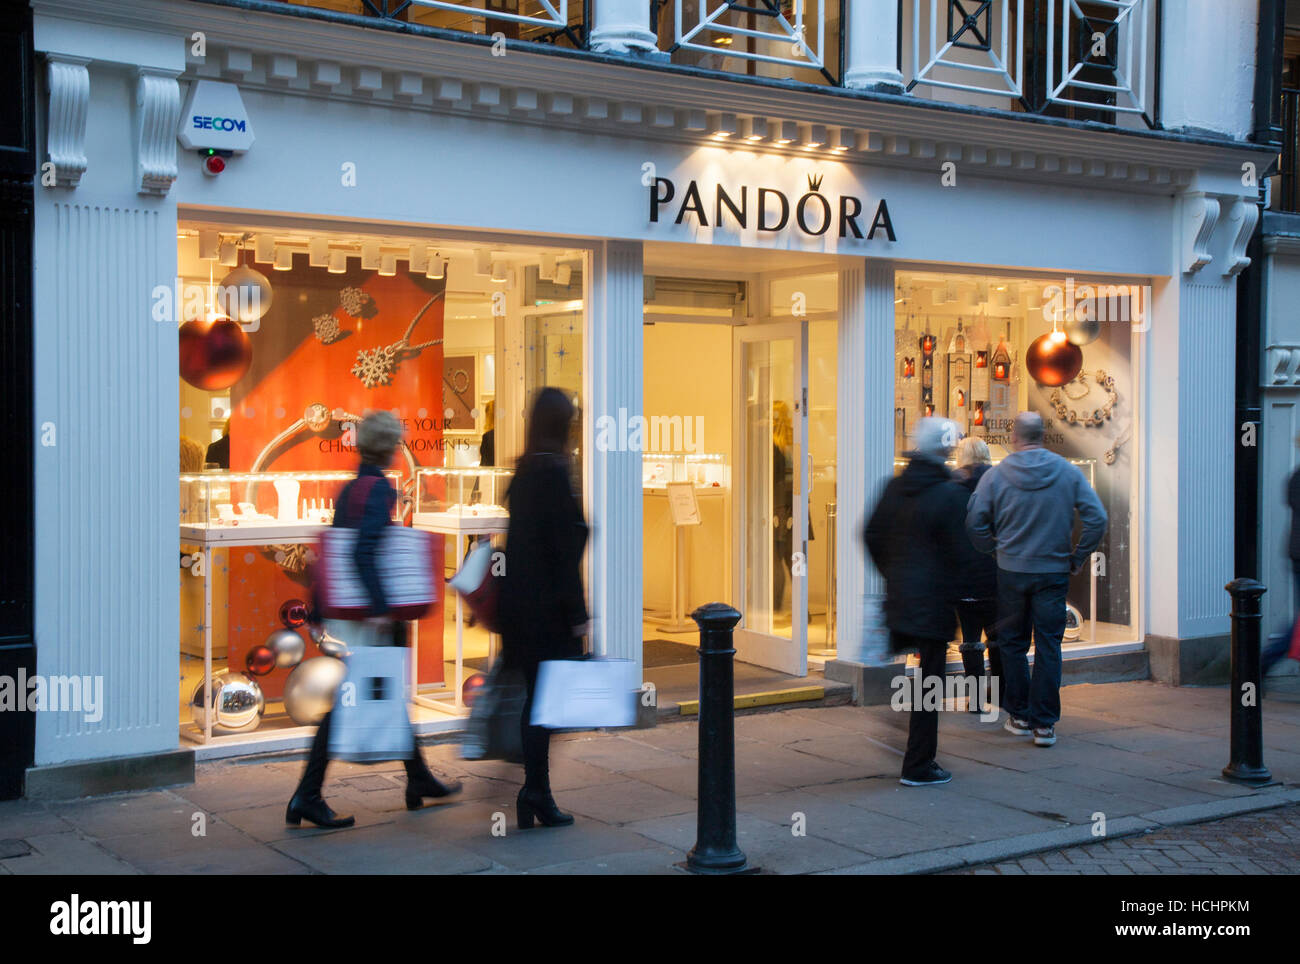 Pandora Jewelry Stores in Chester, Cheshire, UK. Christmas shopping in full swing in the expensive retail sector of the city centre. Late night opening and a mid-winter festival parade ensures an almost extraordinary buying frenzy. Stock Photo